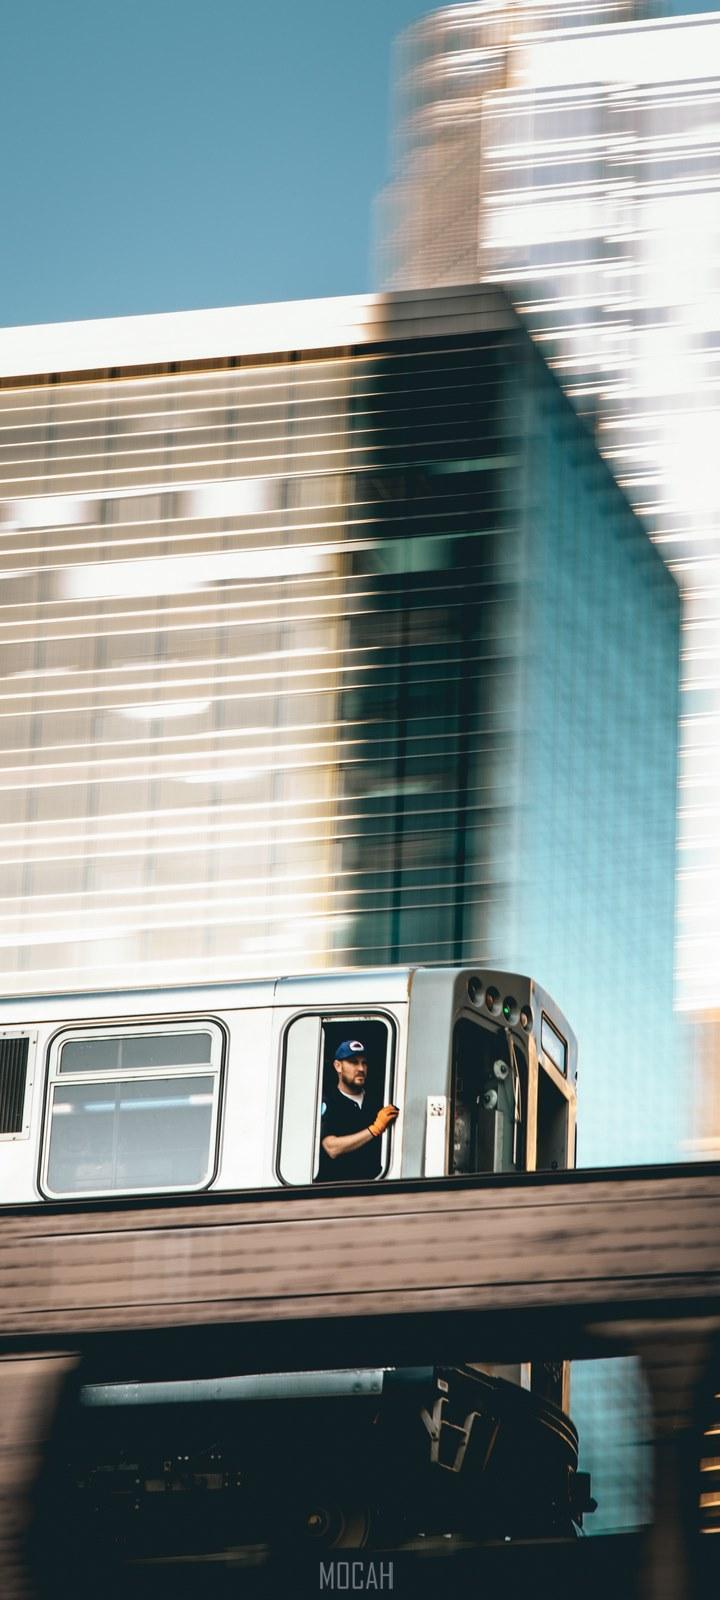 HD wallpaper, Man In A Moving Urban Train, Xiaomi Redmi 9I Full Hd Wallpaper, 720X1600, A Man Looking Out Of A Moving Urban Trail In Chicago